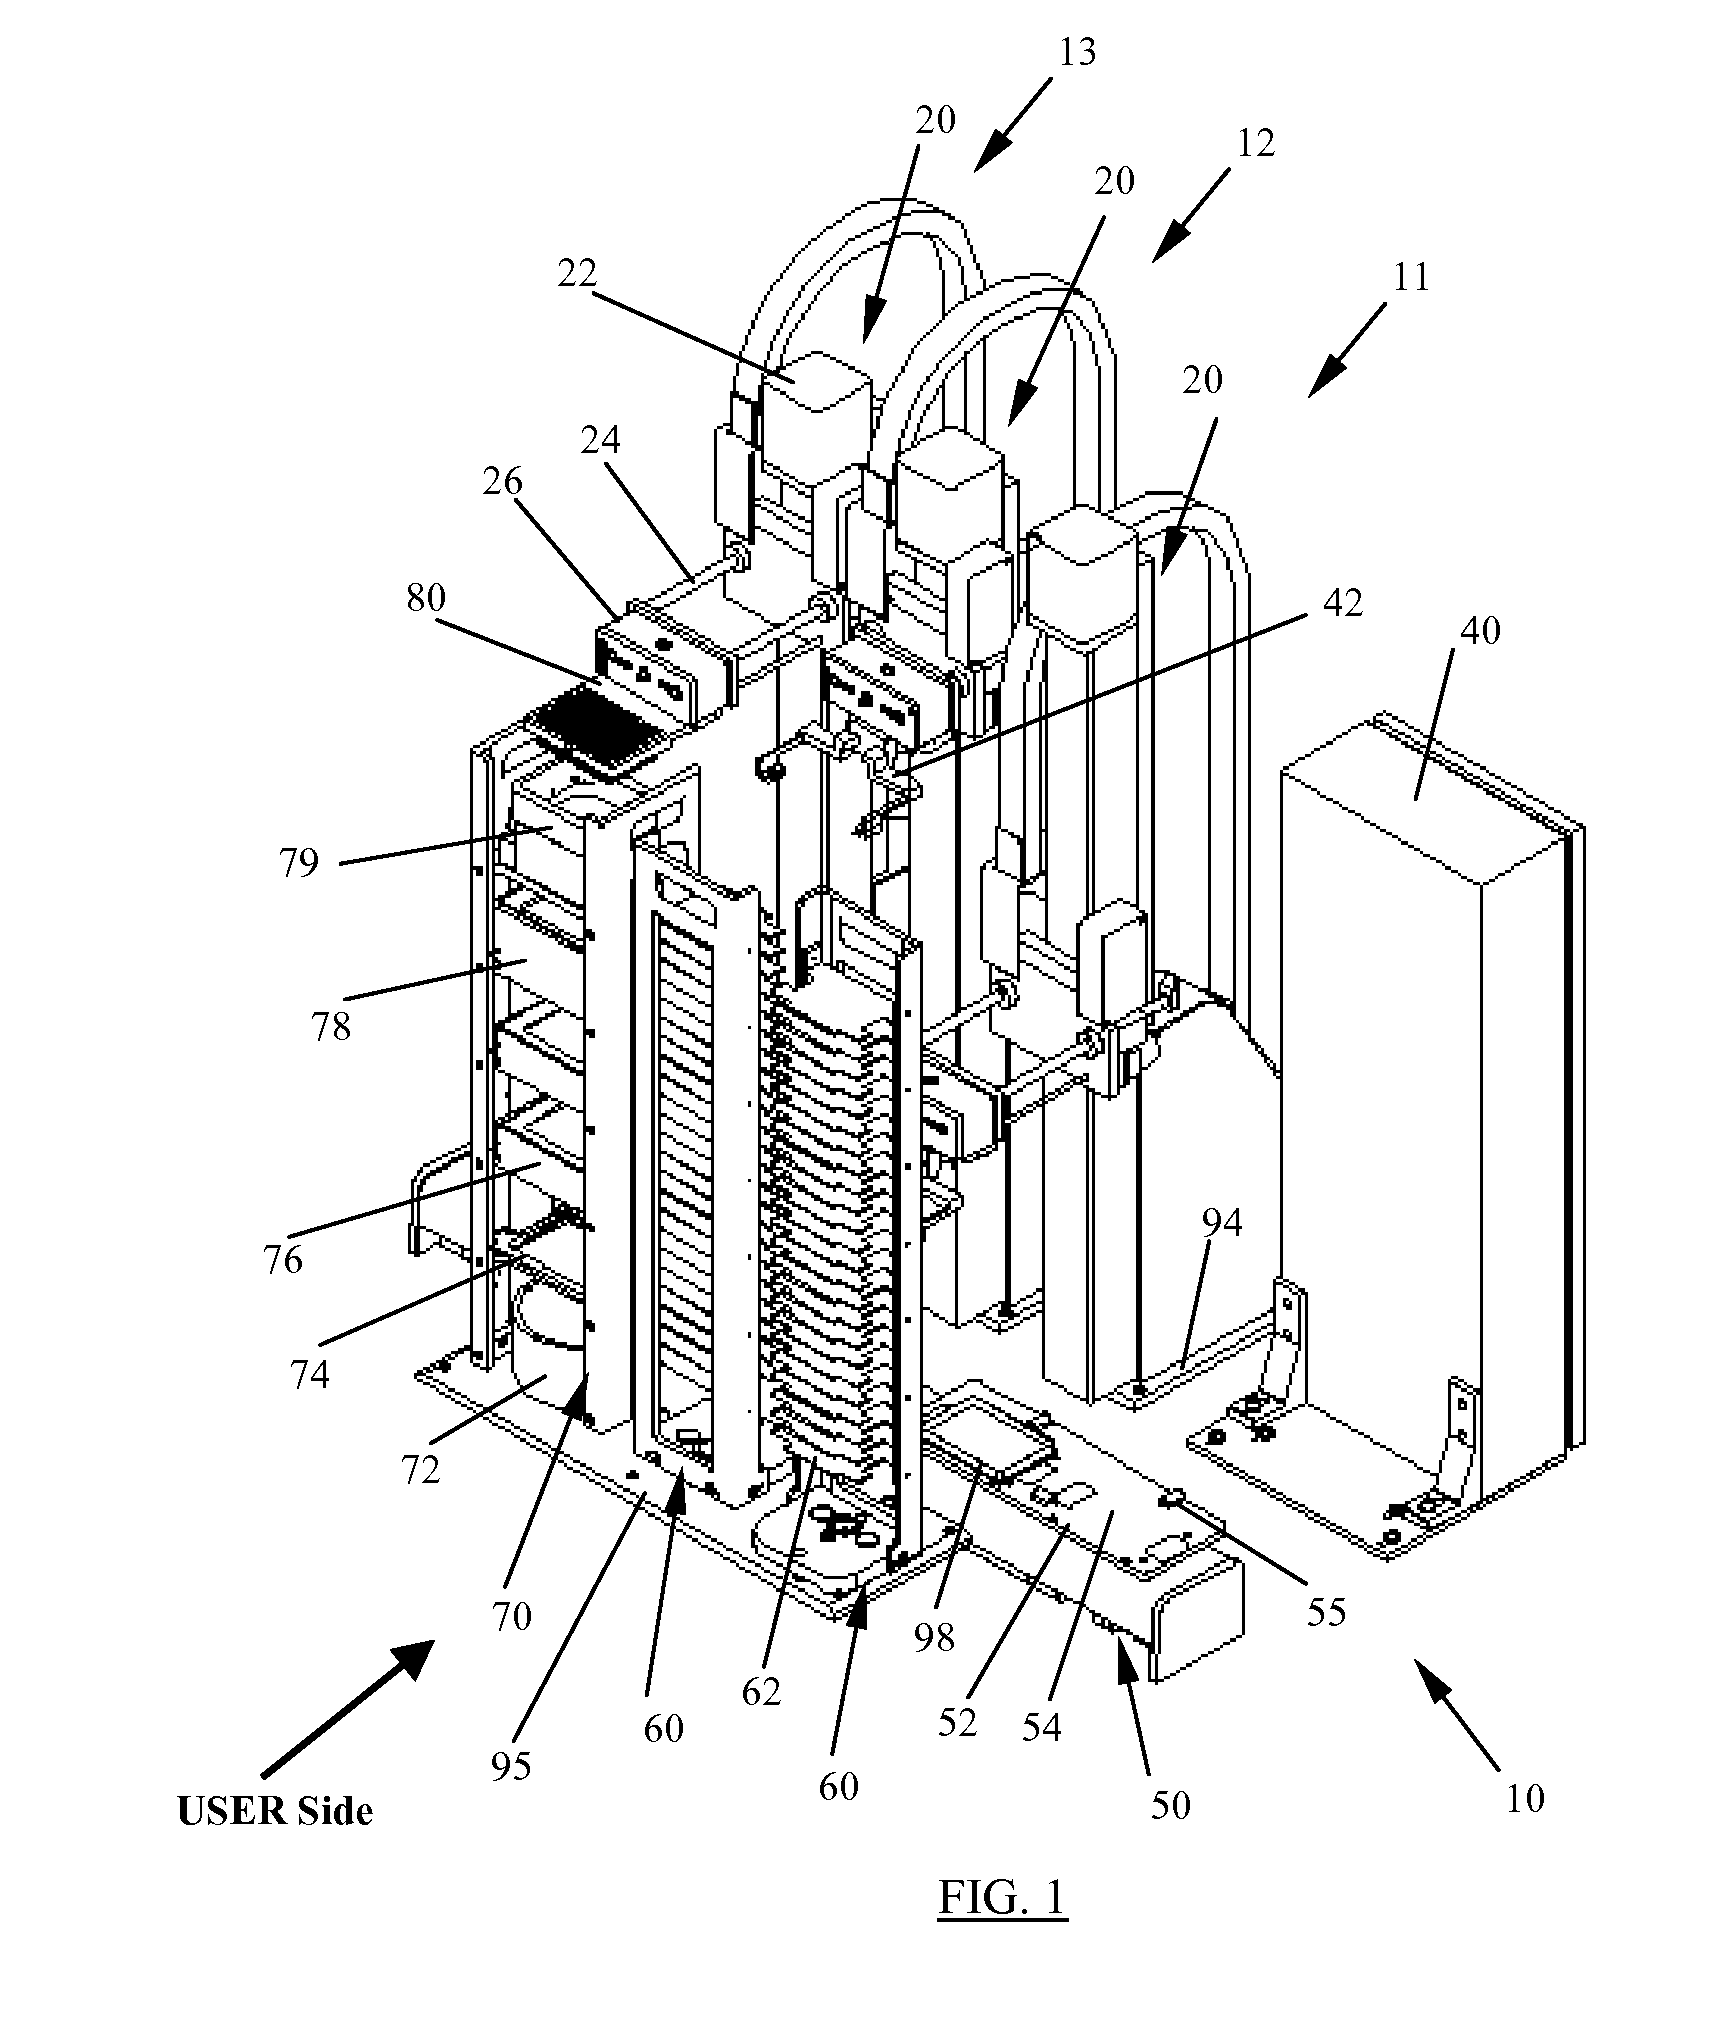 Modular and Scalable Apparatus for Process Automation